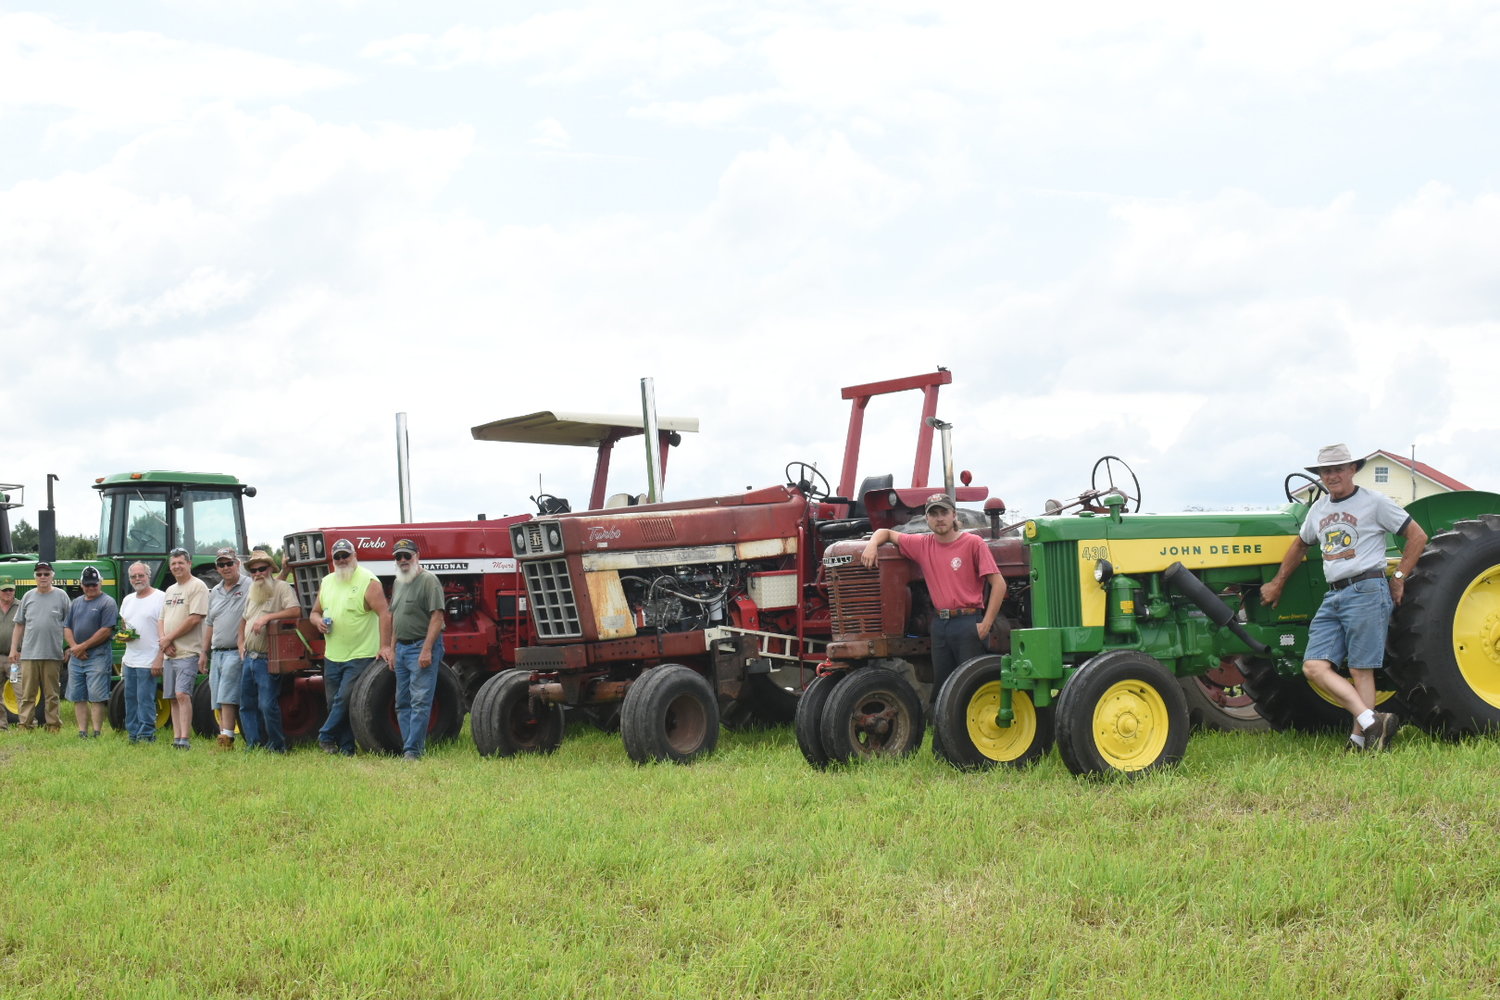 Tug Hill Antique Tractor Show draws enthusiasts to Boonville Daily